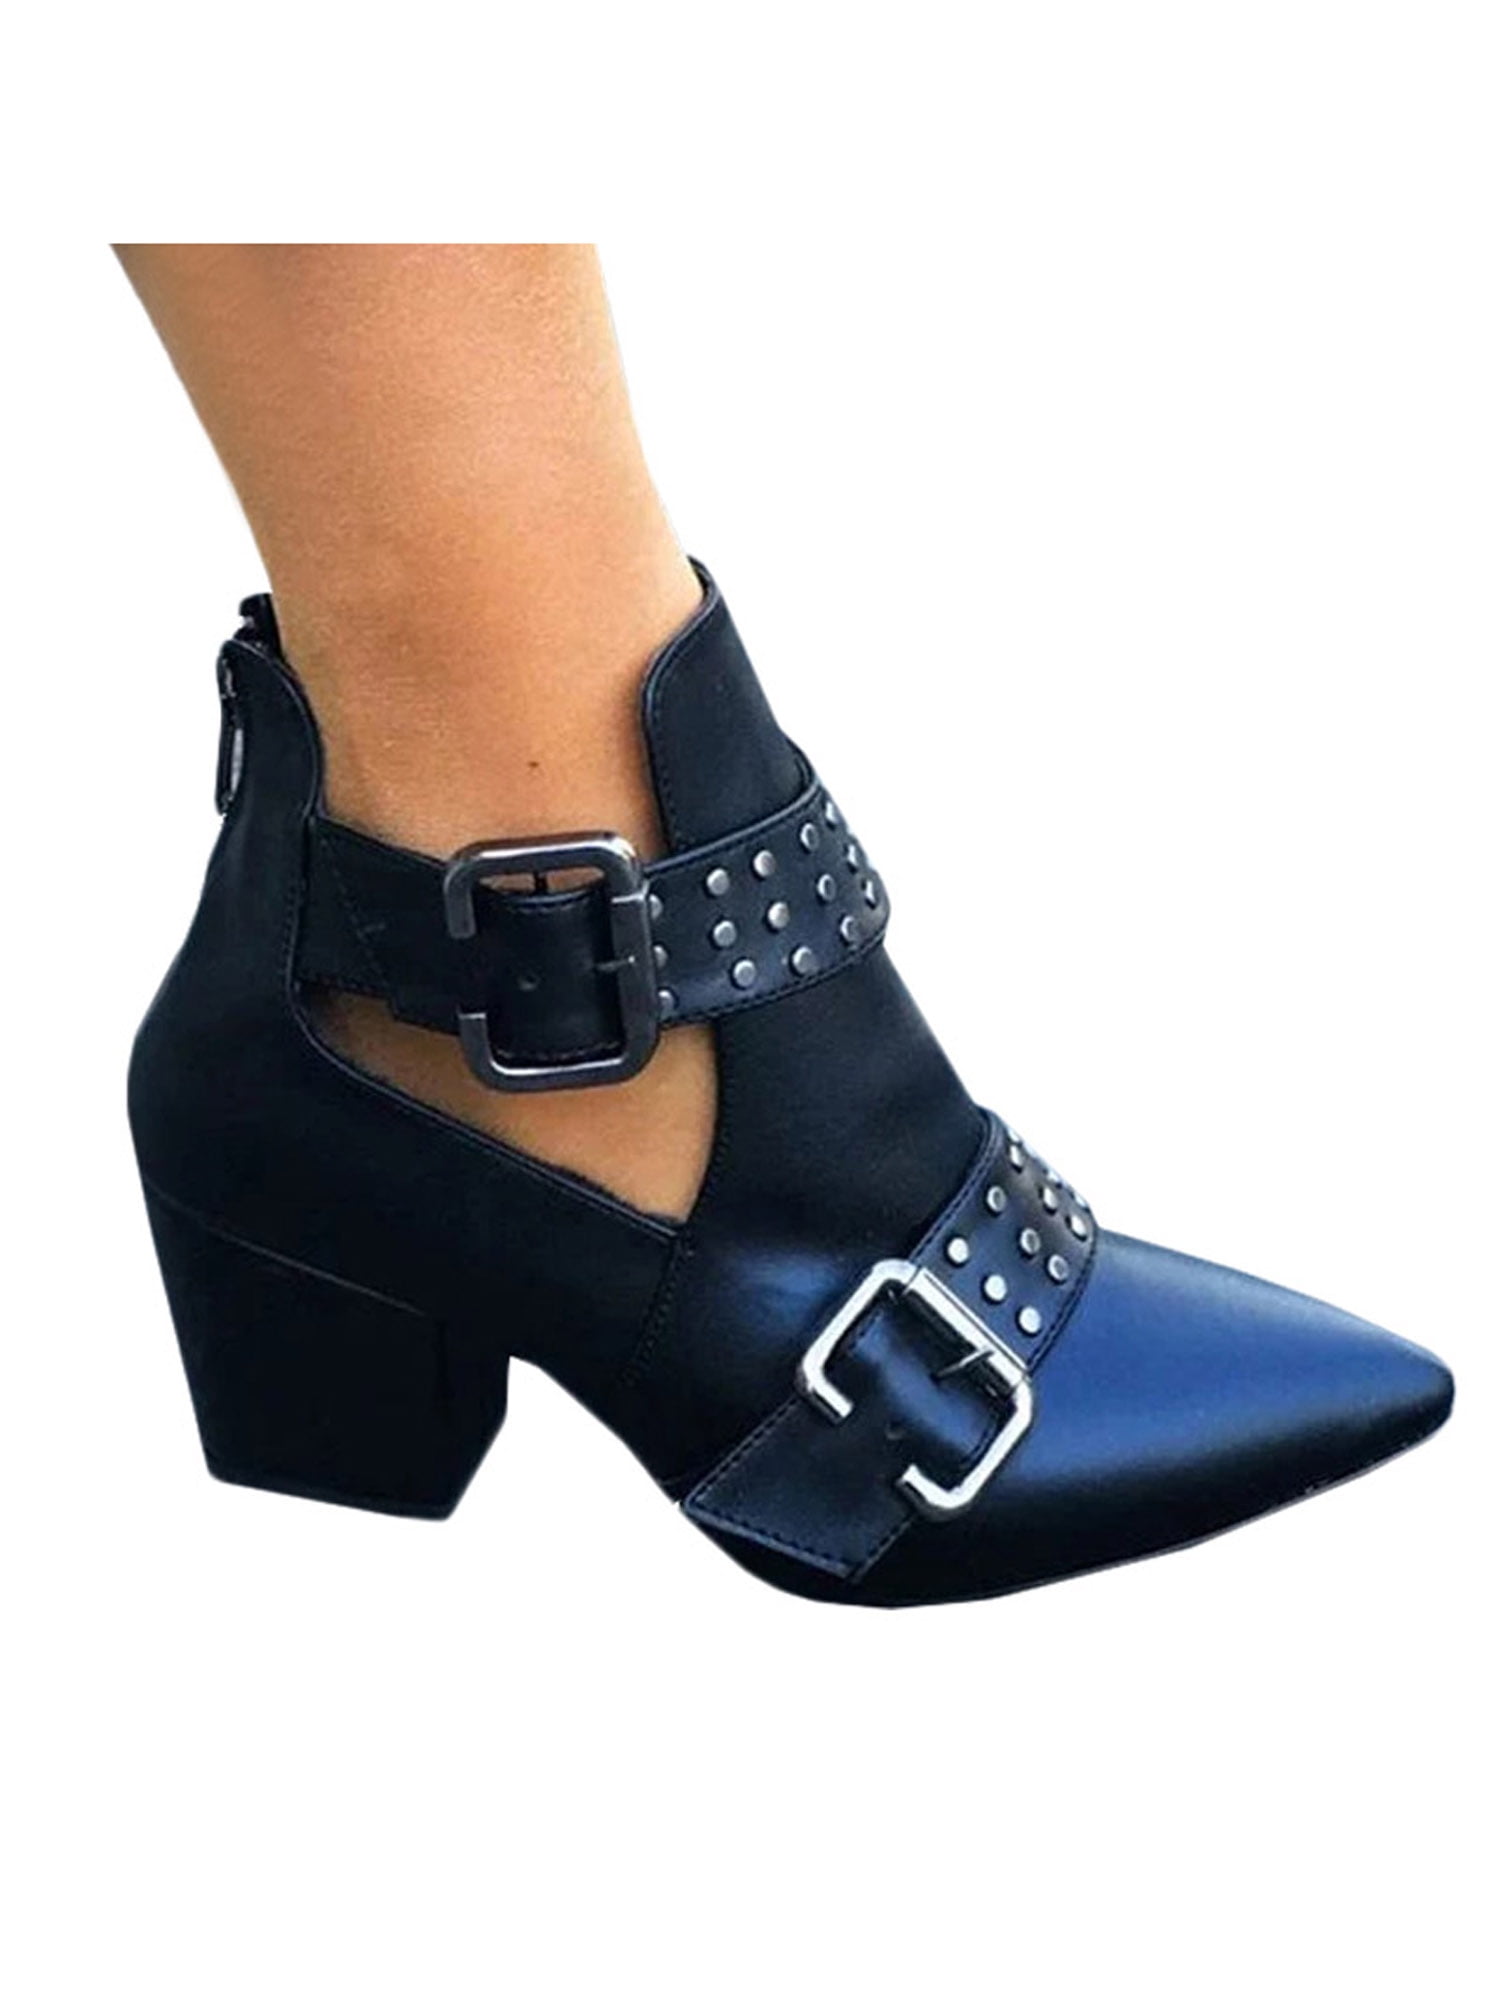 Womens Lady Chelsea Ankle Boots Low Block Heel Buckle Cut Out Side Booties Shoes 